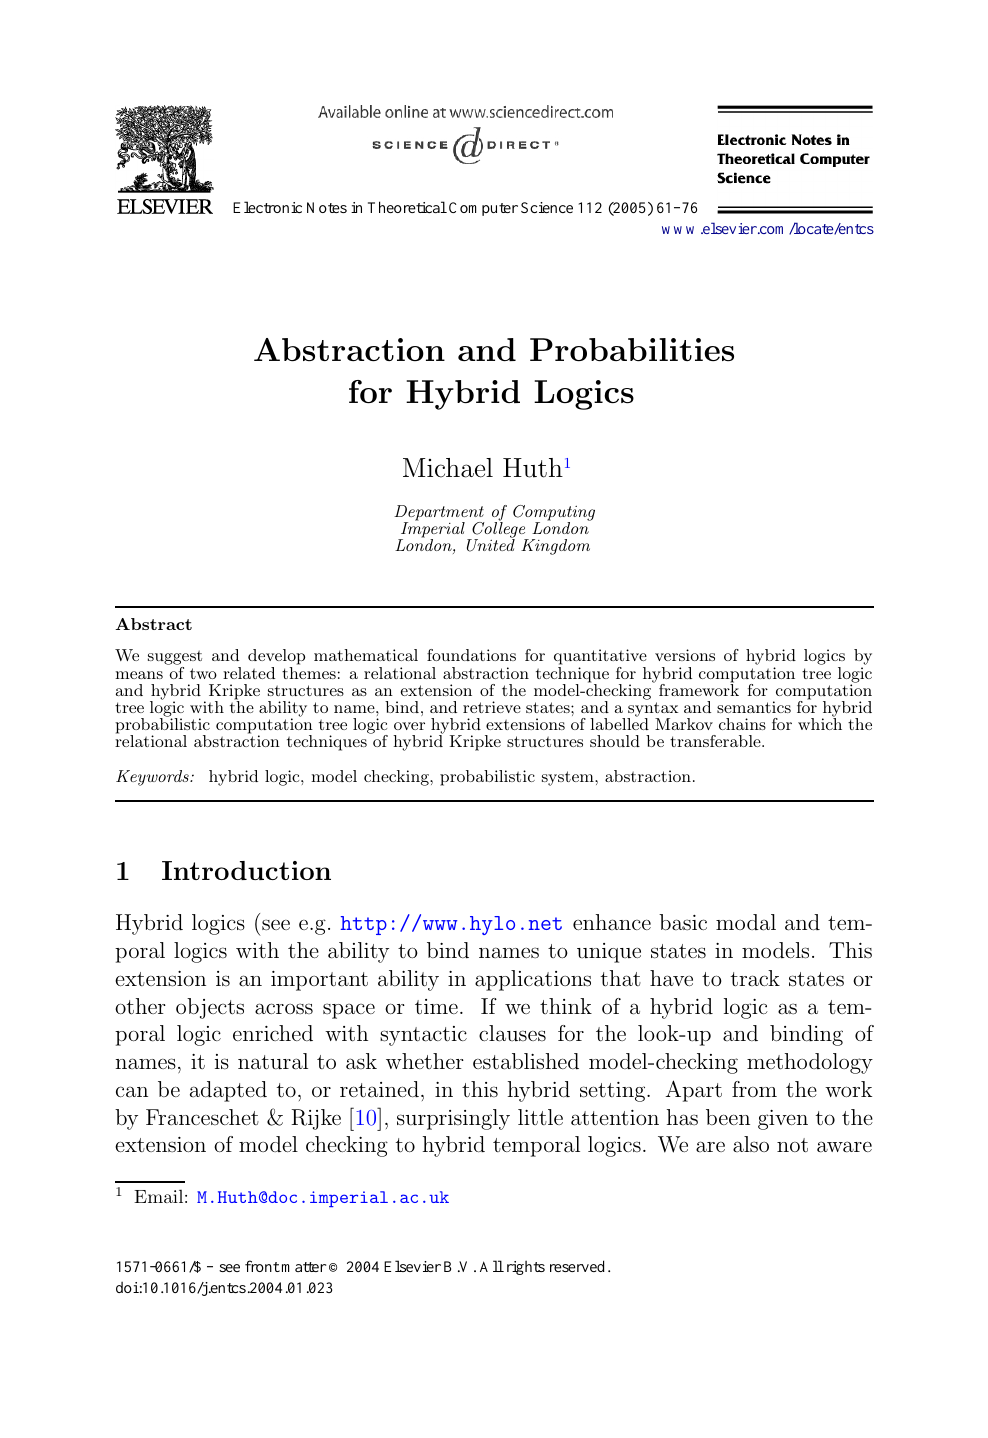 Abstraction And Probabilities For Hybrid Logics Topic Of Research Paper In Computer And Information Sciences Download Scholarly Article Pdf And Read For Free On Cyberleninka Open Science Hub